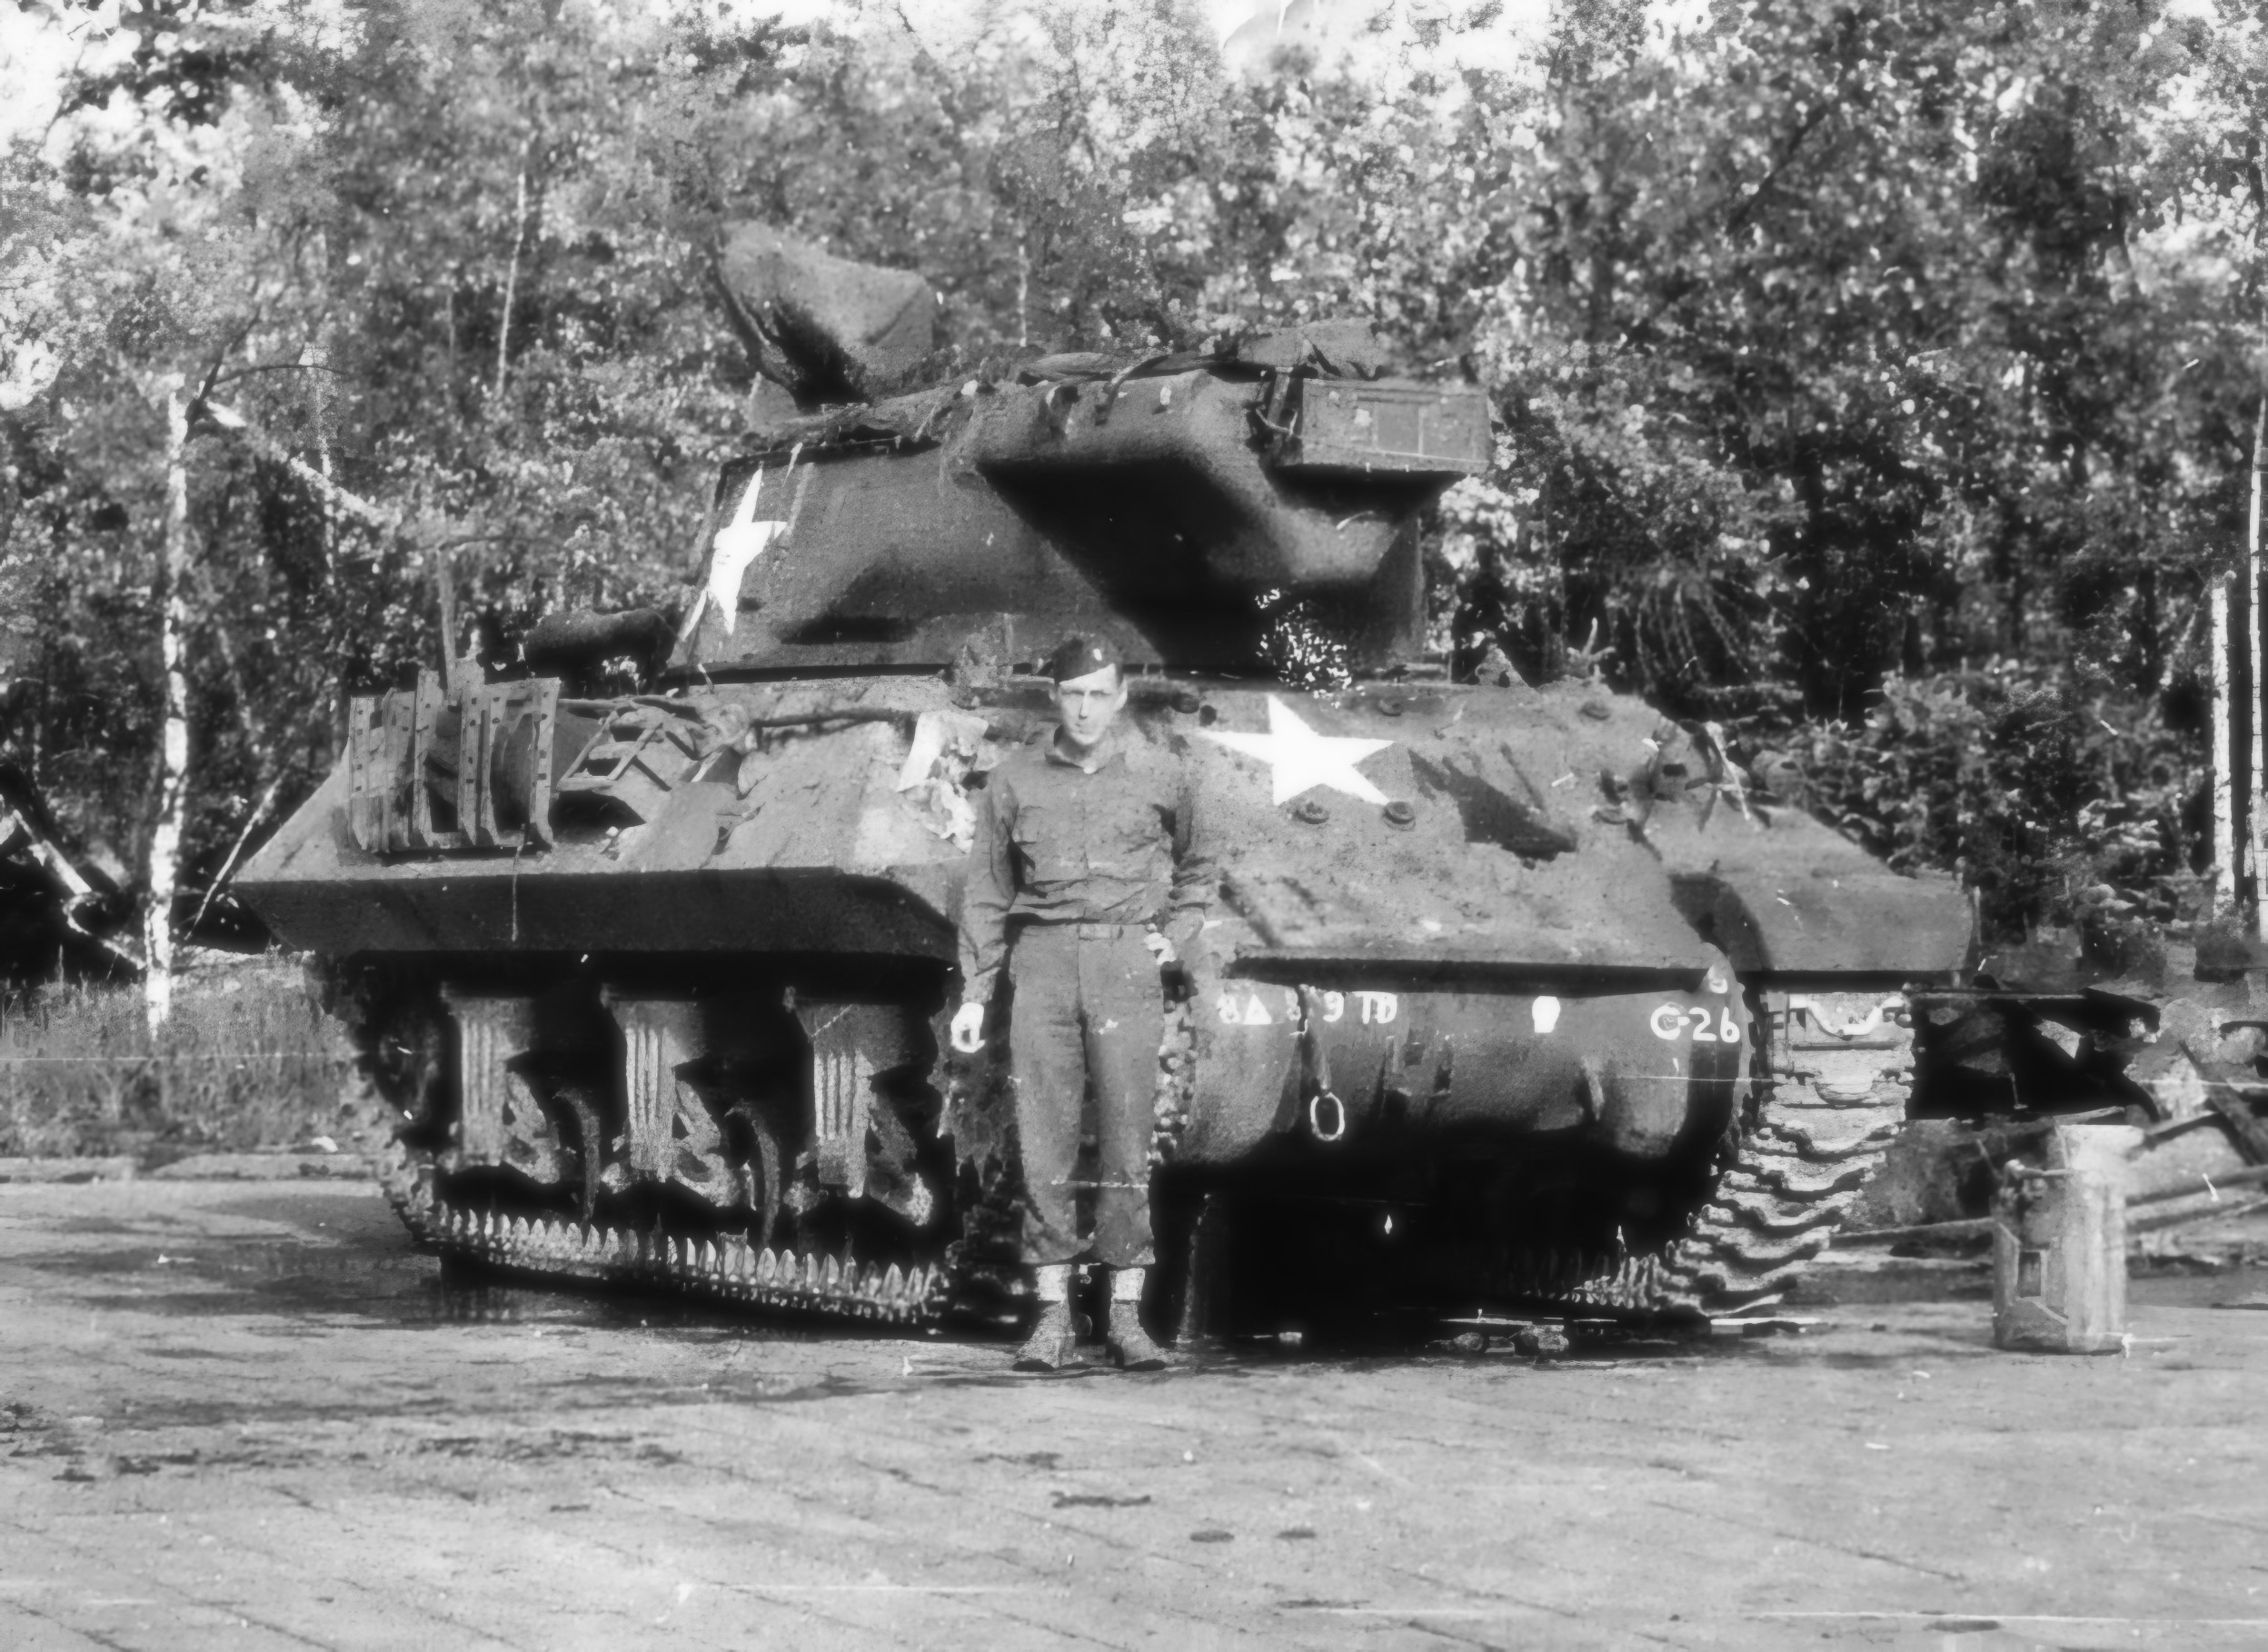 An unidentified 809th TD Battalion officer poses in front of an M36 Jackson tank destroyer. The battalion operated with M18 Hellcat tank destroyers from the beginning of their deployment until April 11, 1945 (Baker Company) and April 13, 1945 (Able and Charlie Companies), when they were replaced with M36 tank destroyers in Soest, Germany.